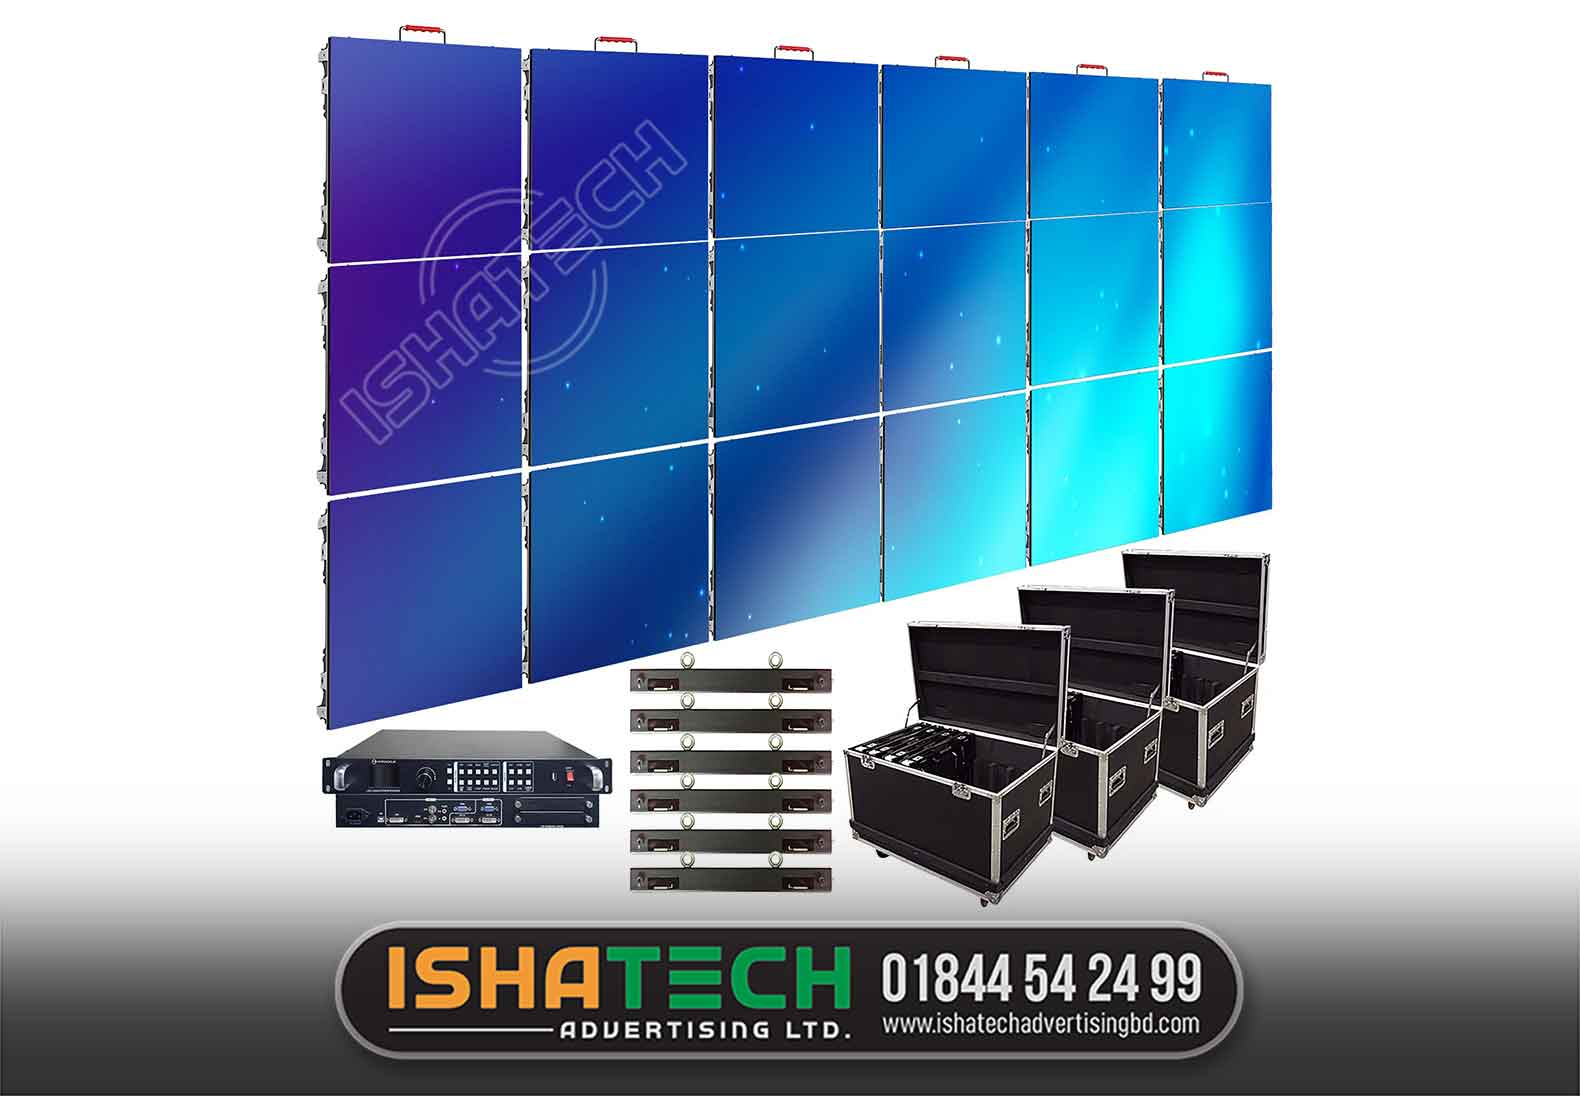 Fixed Pitch 2.5mm LED Video Wall Panel Price Church Giant SMD Full Color Indoor LED Display Screen P2.5 Pantalla LED PARA Exterior Price 250 taka